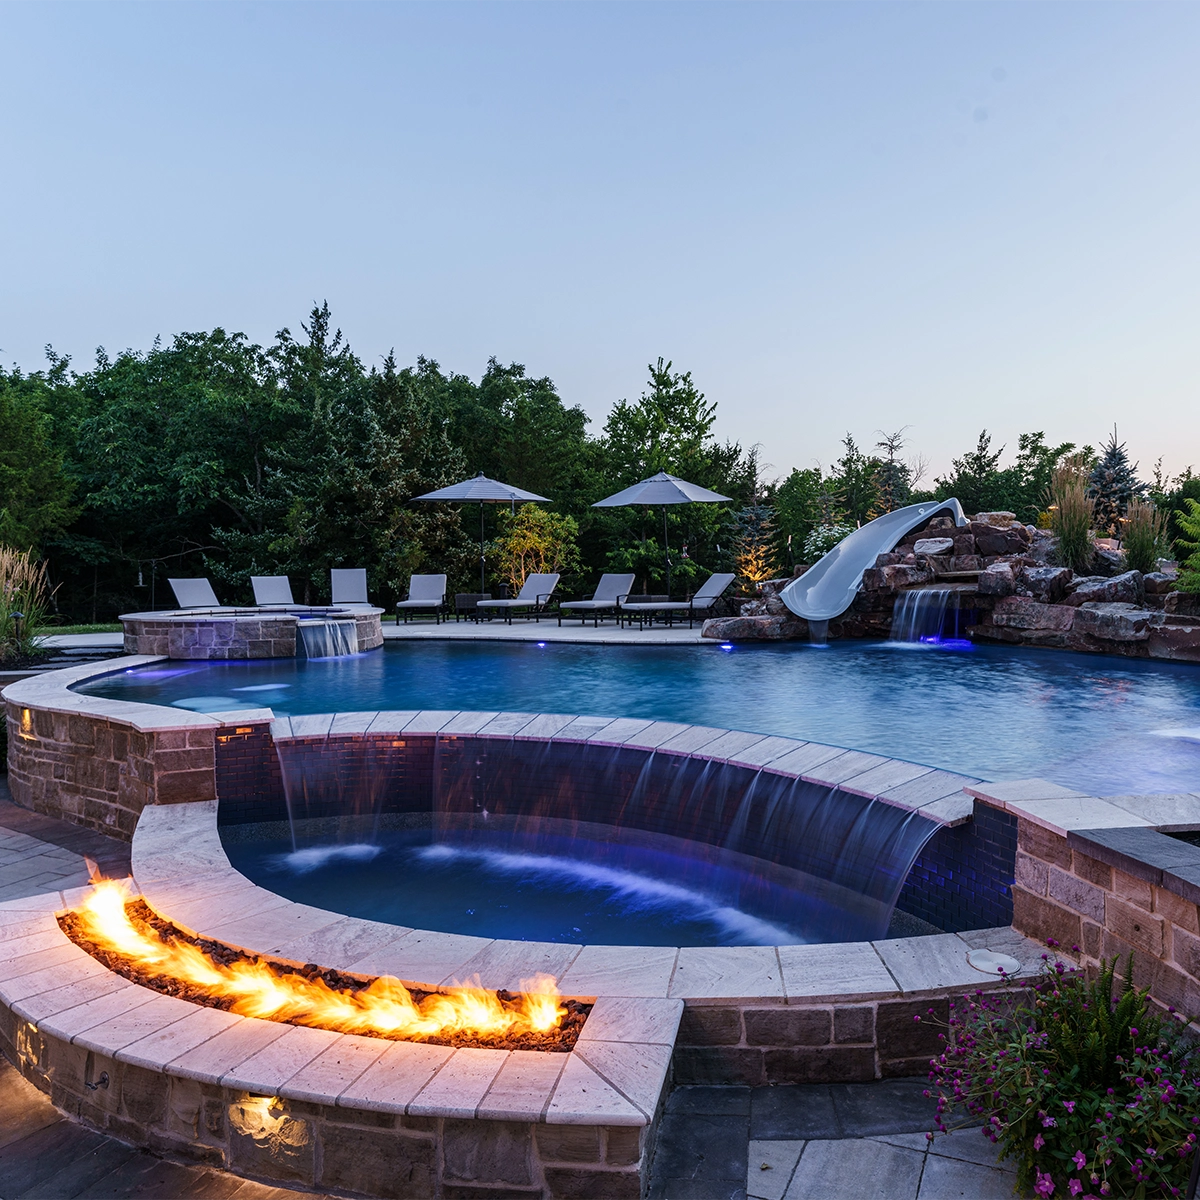 Outdoor pool with jacuzzi, waterfall, firepit and slide